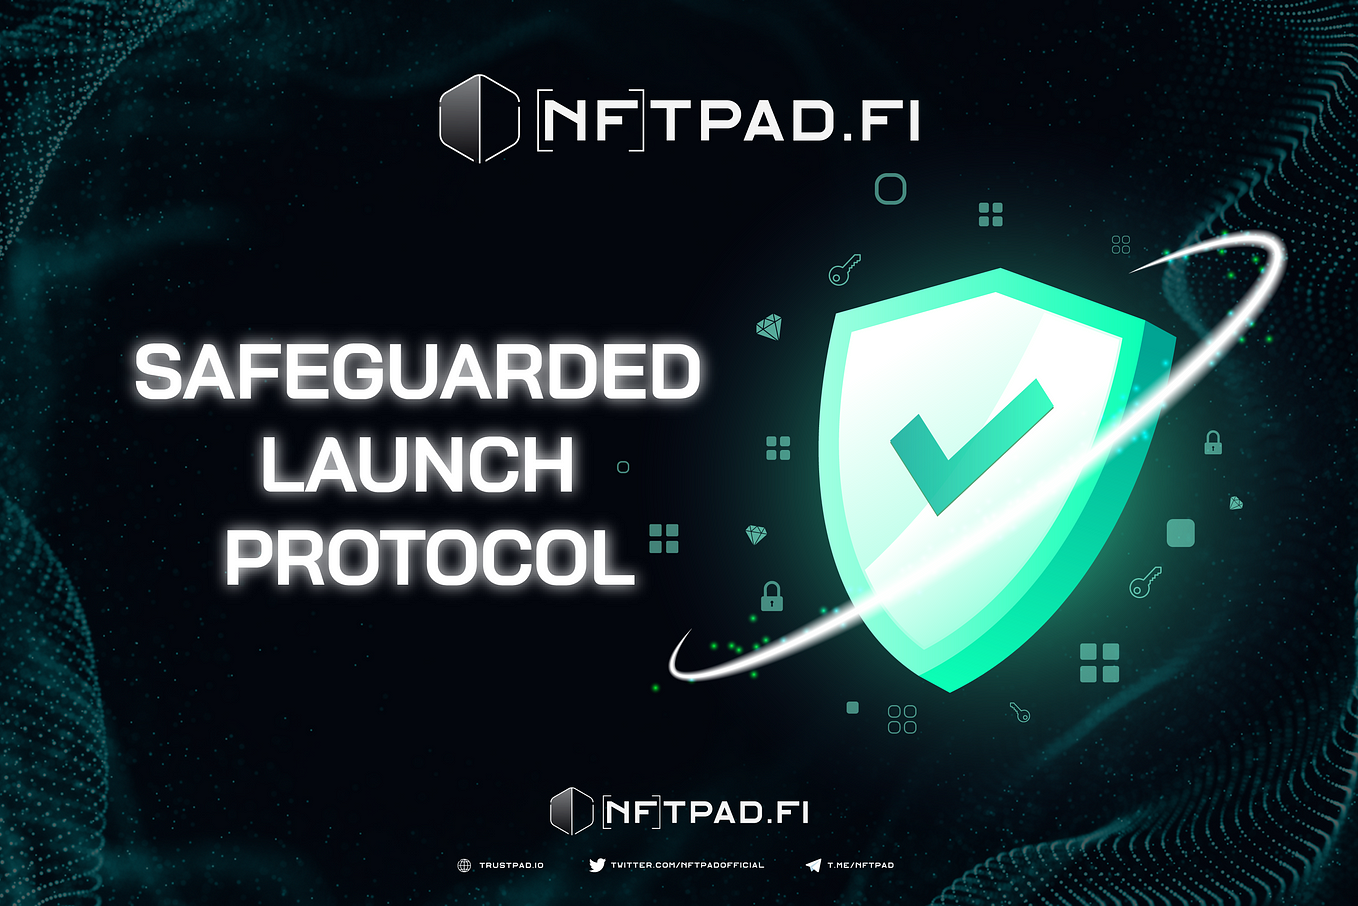 NFTPad Introduces “Safeguarded Launch Protocol”